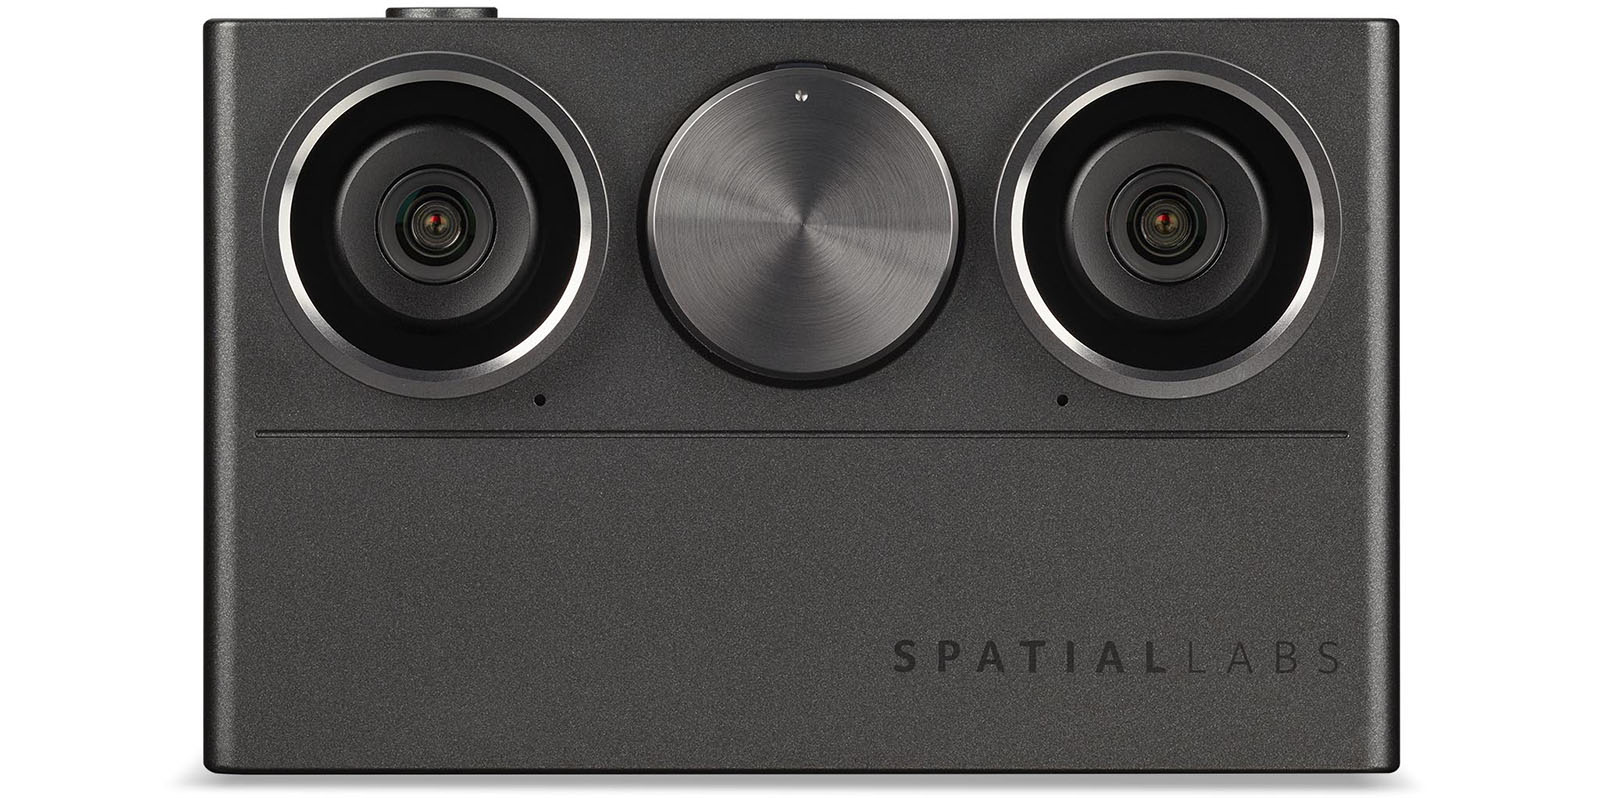 The image shows the front view of a sleek, metallic SpatialLabs device with two prominent camera lenses on each side and a central circular knob or button. The brand name "SPATIALLABS" is visible on the bottom right corner of the device.